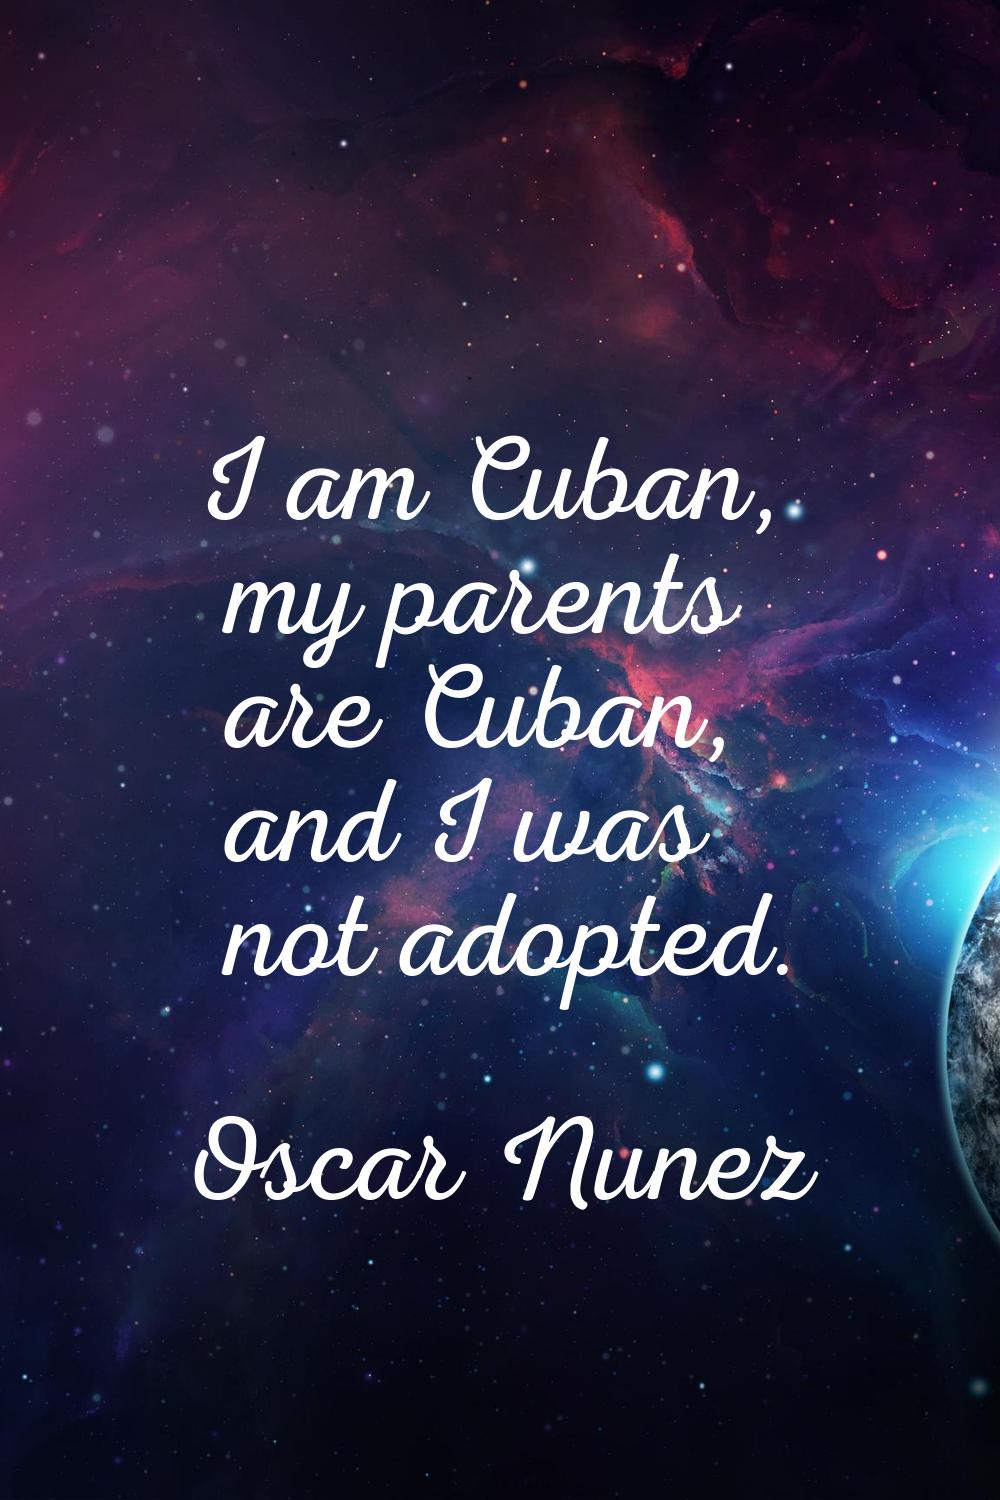 I am Cuban, my parents are Cuban, and I was not adopted.